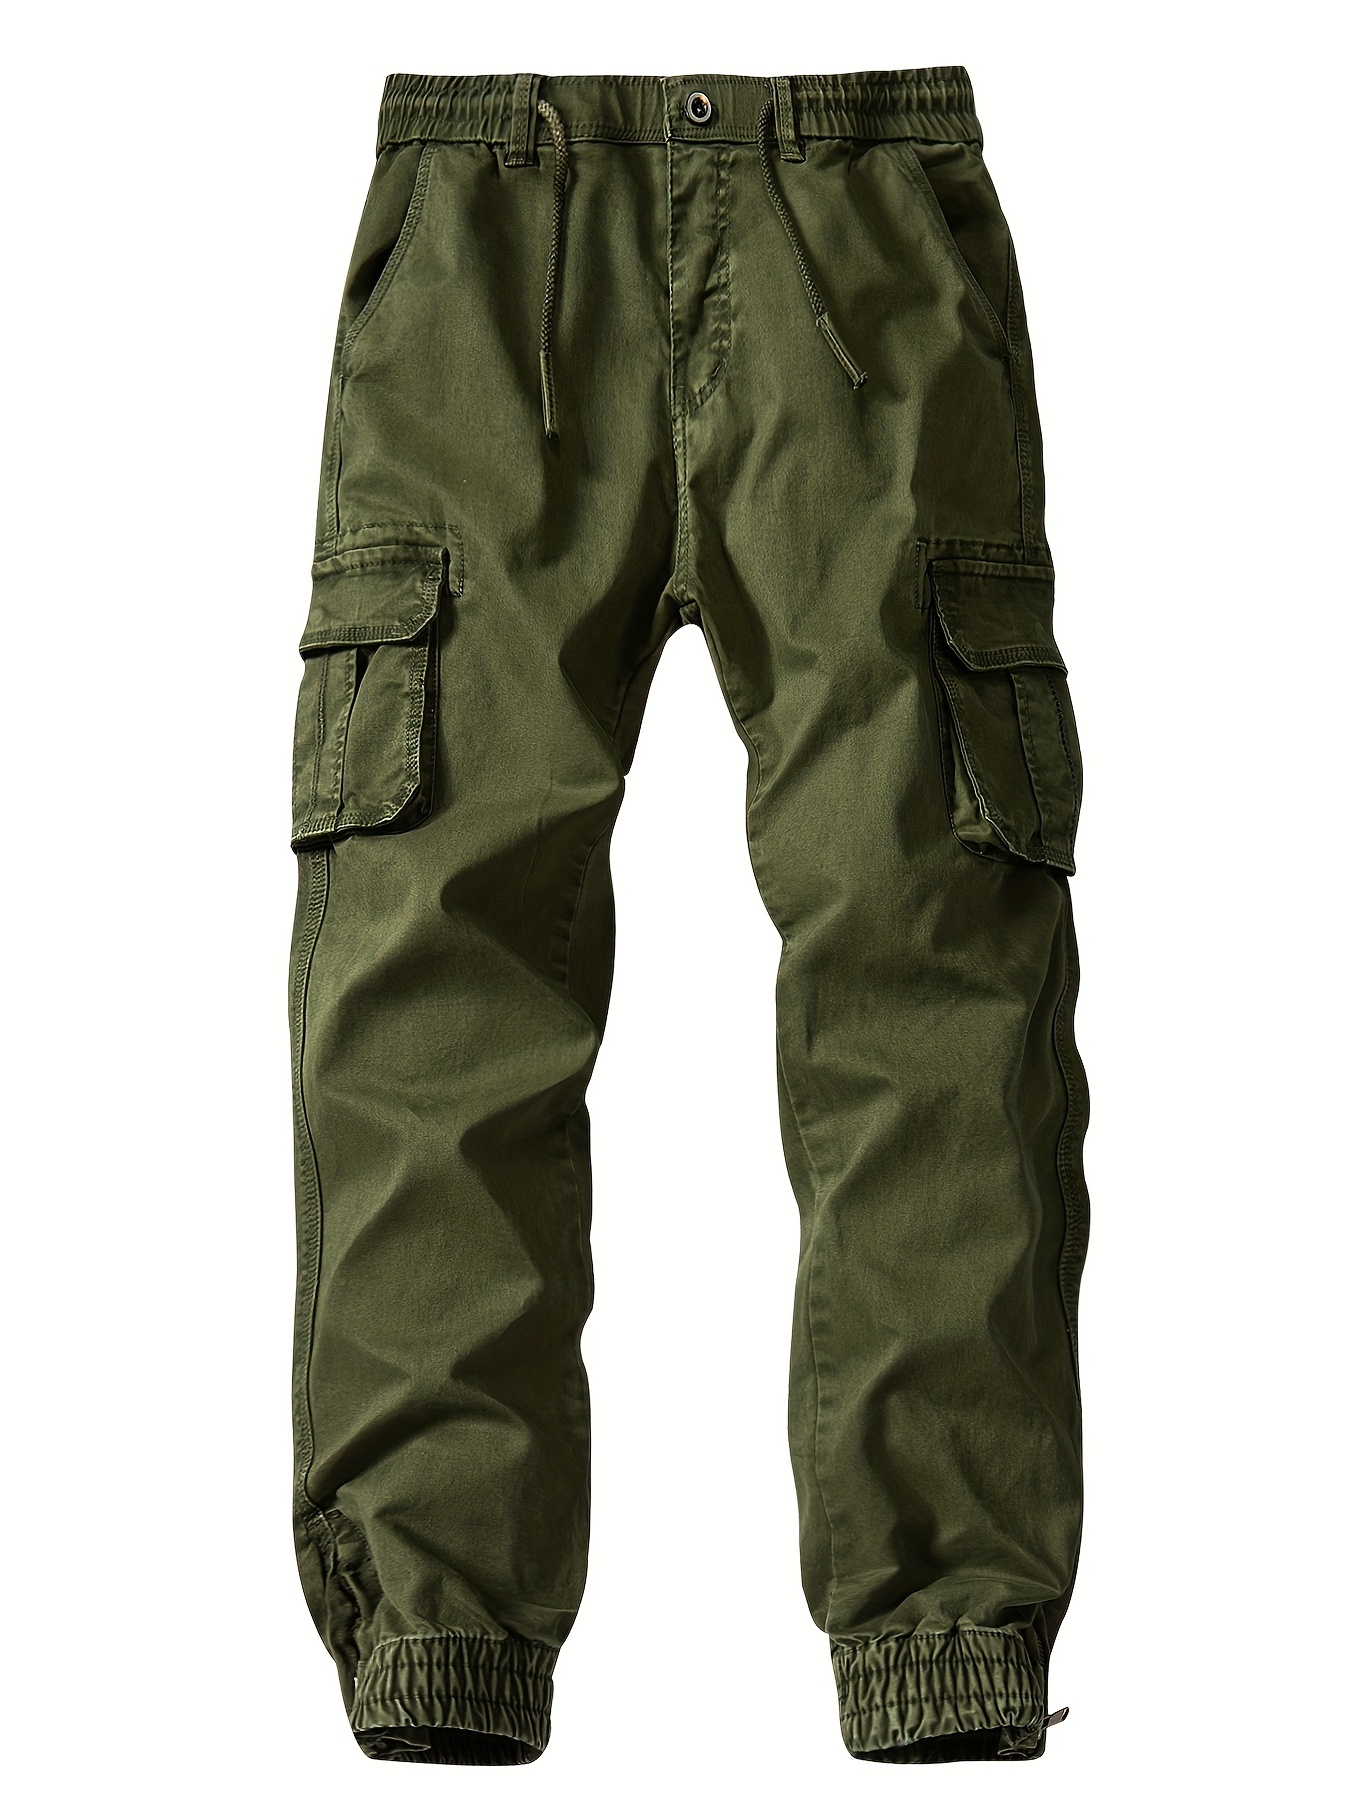 Army Green Multi-Pocket Cargo Jeans